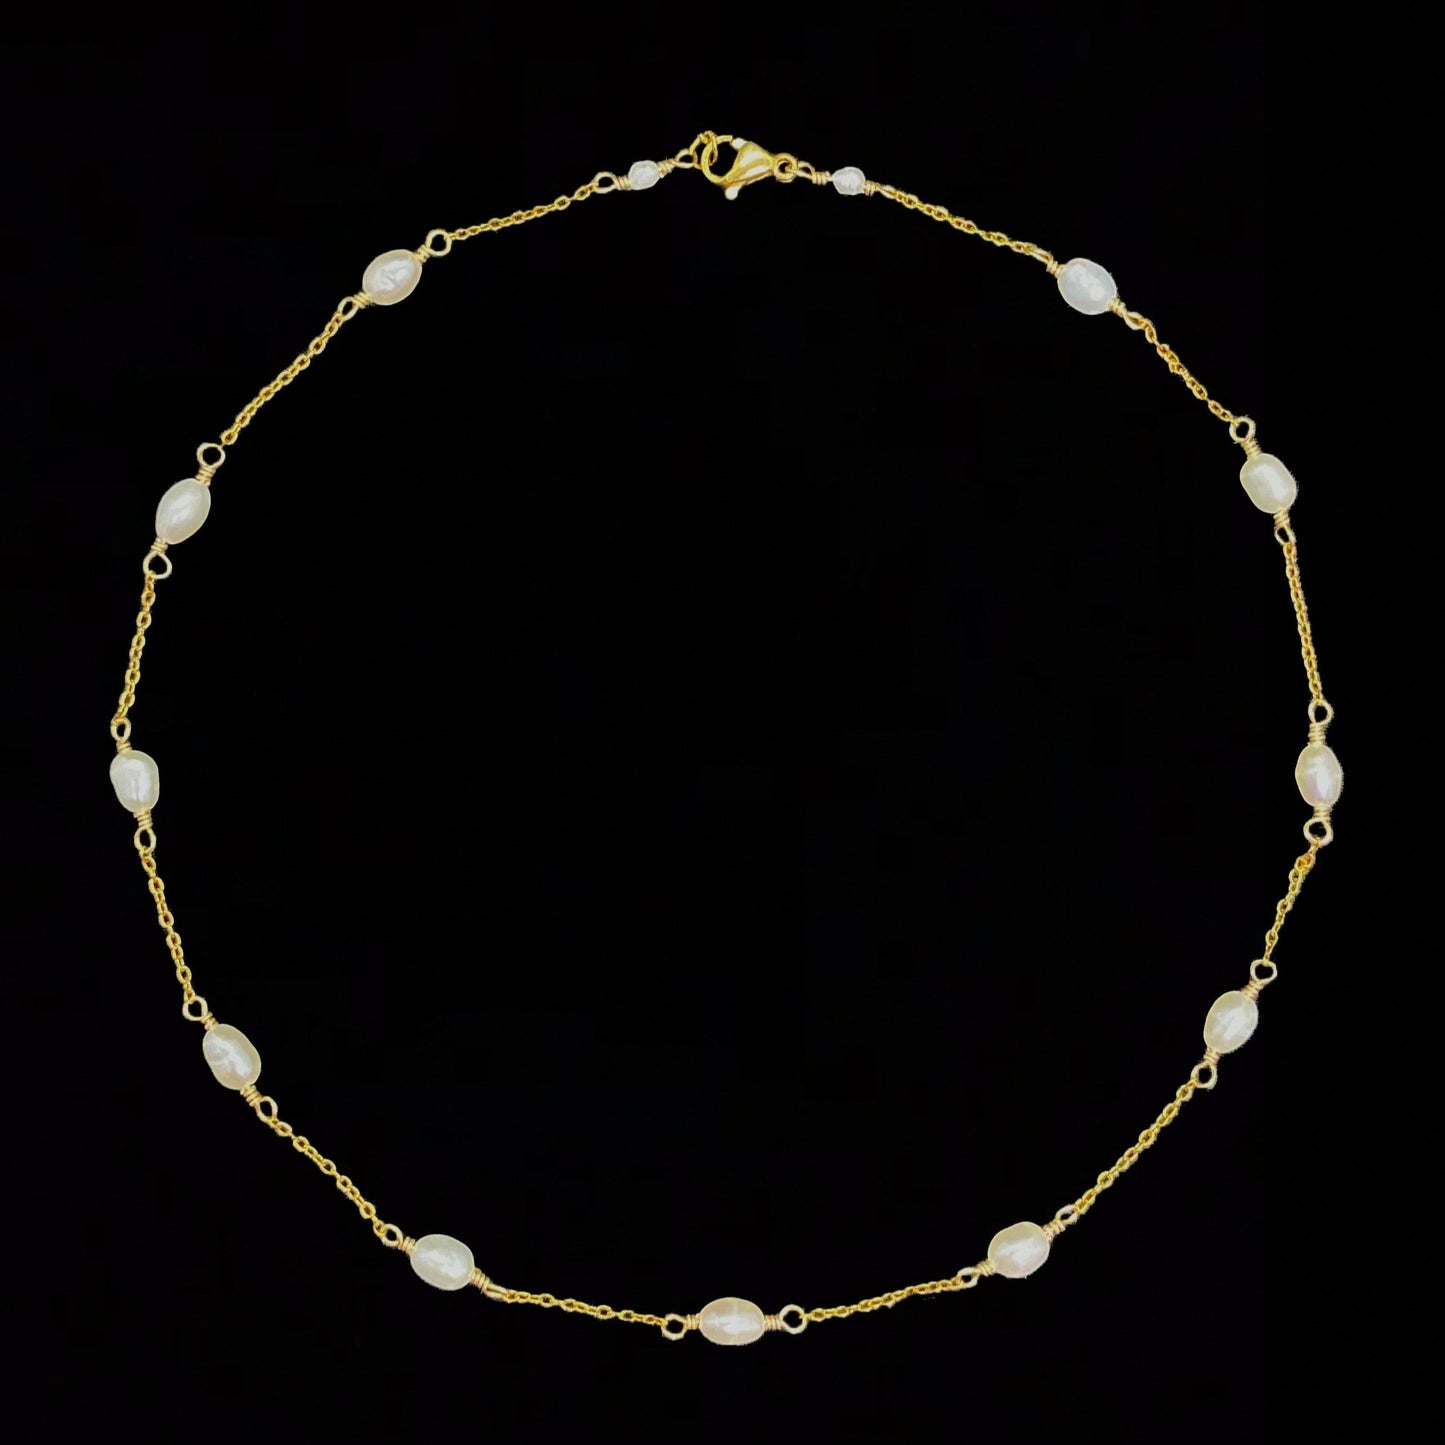 IZA NECKLACE - FRESH WATER PEARLS